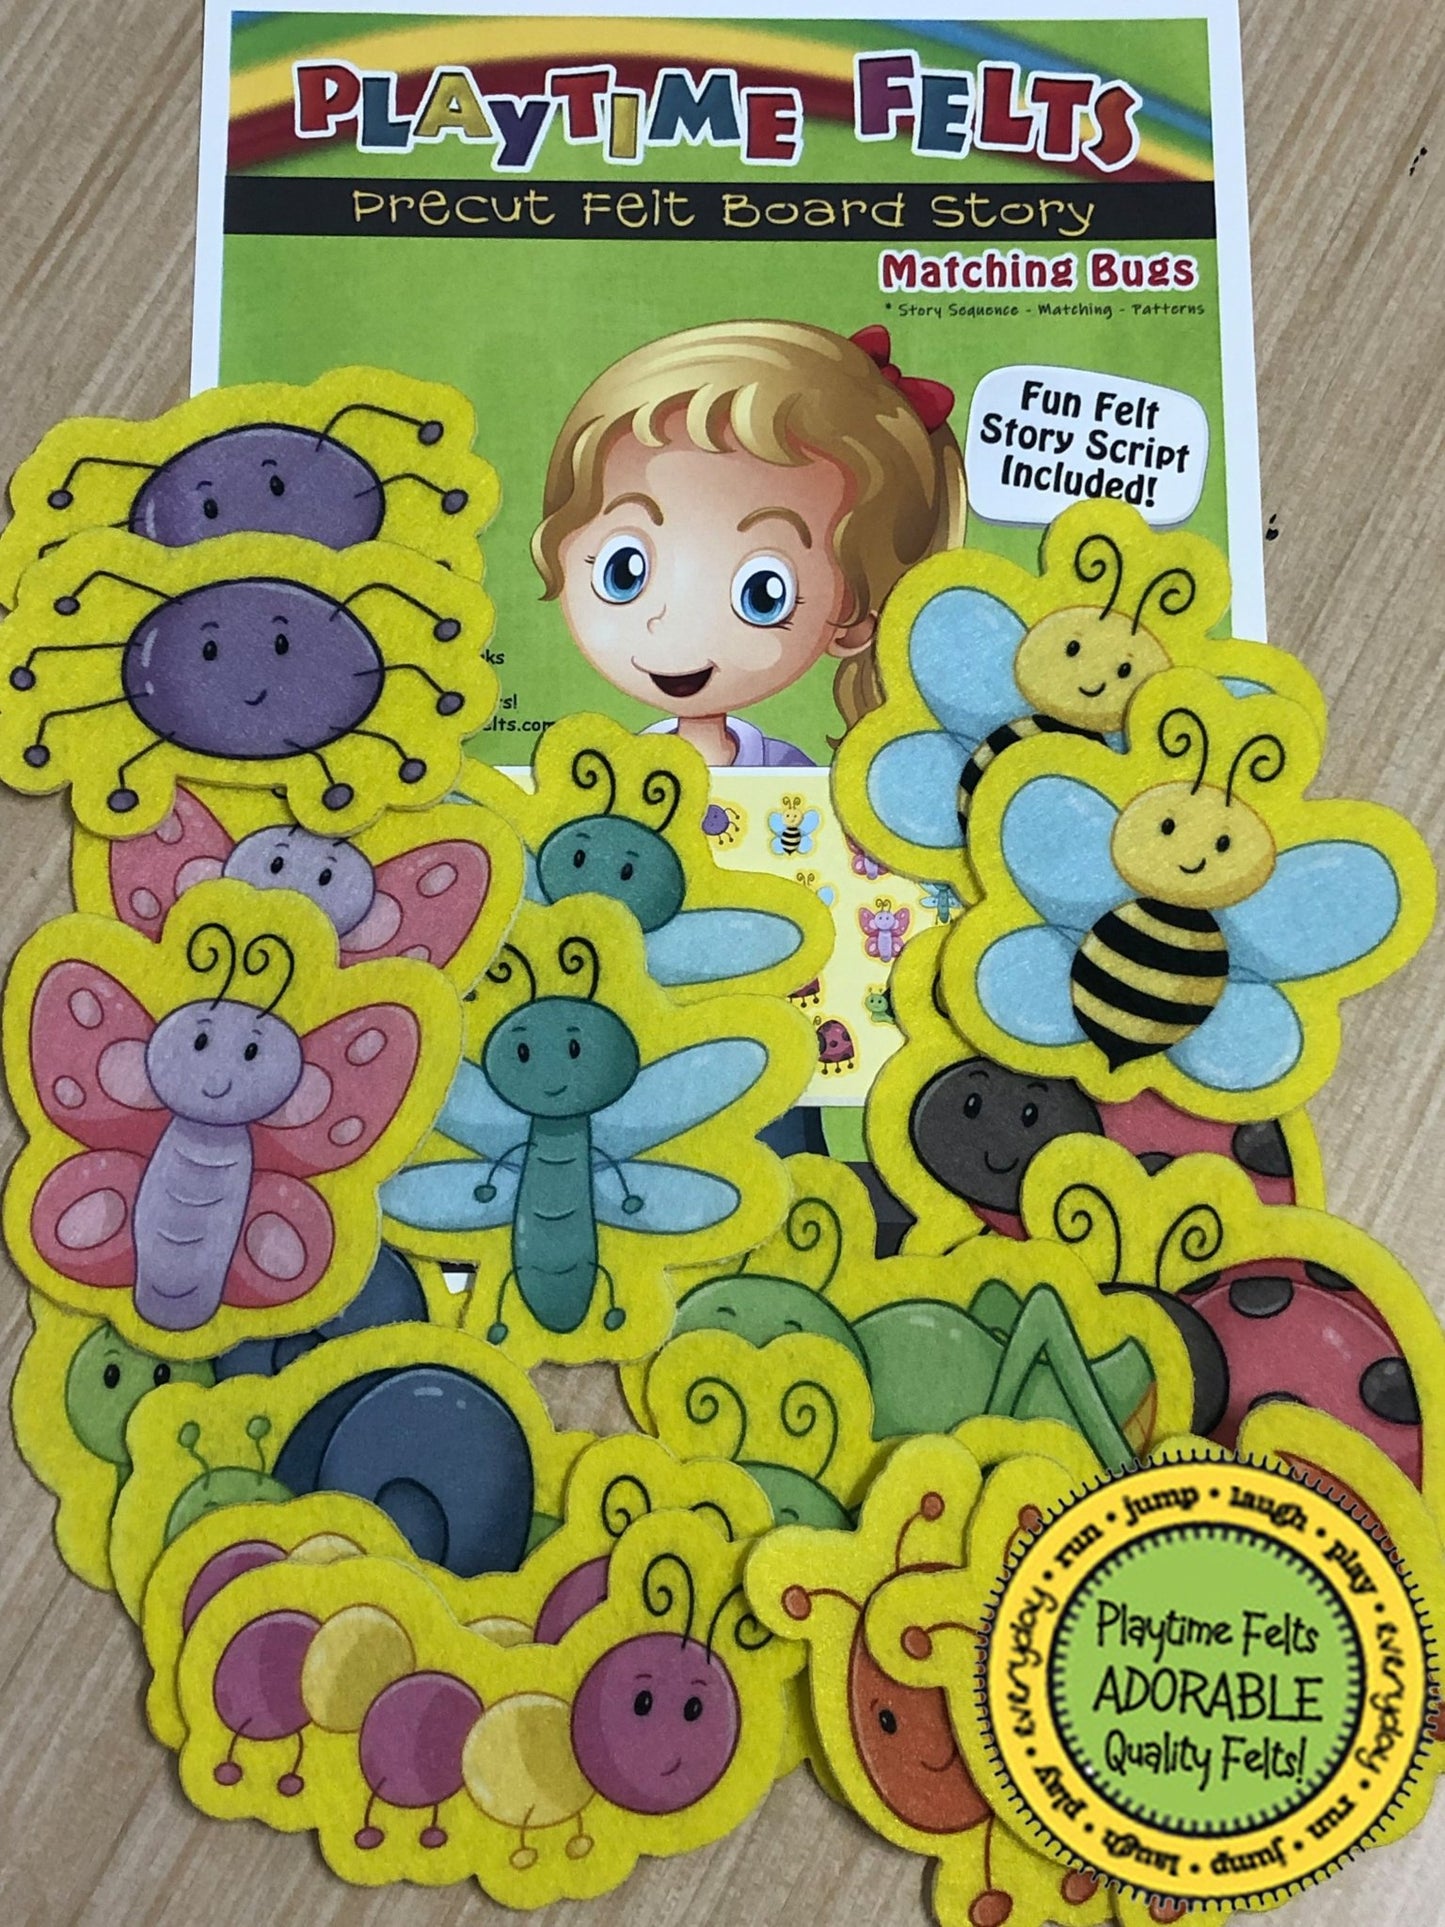 Spring Matching Bugs Felt Board Play Matching and Patterns - Felt Board Stories for Preschool Classroom Playtime Felts